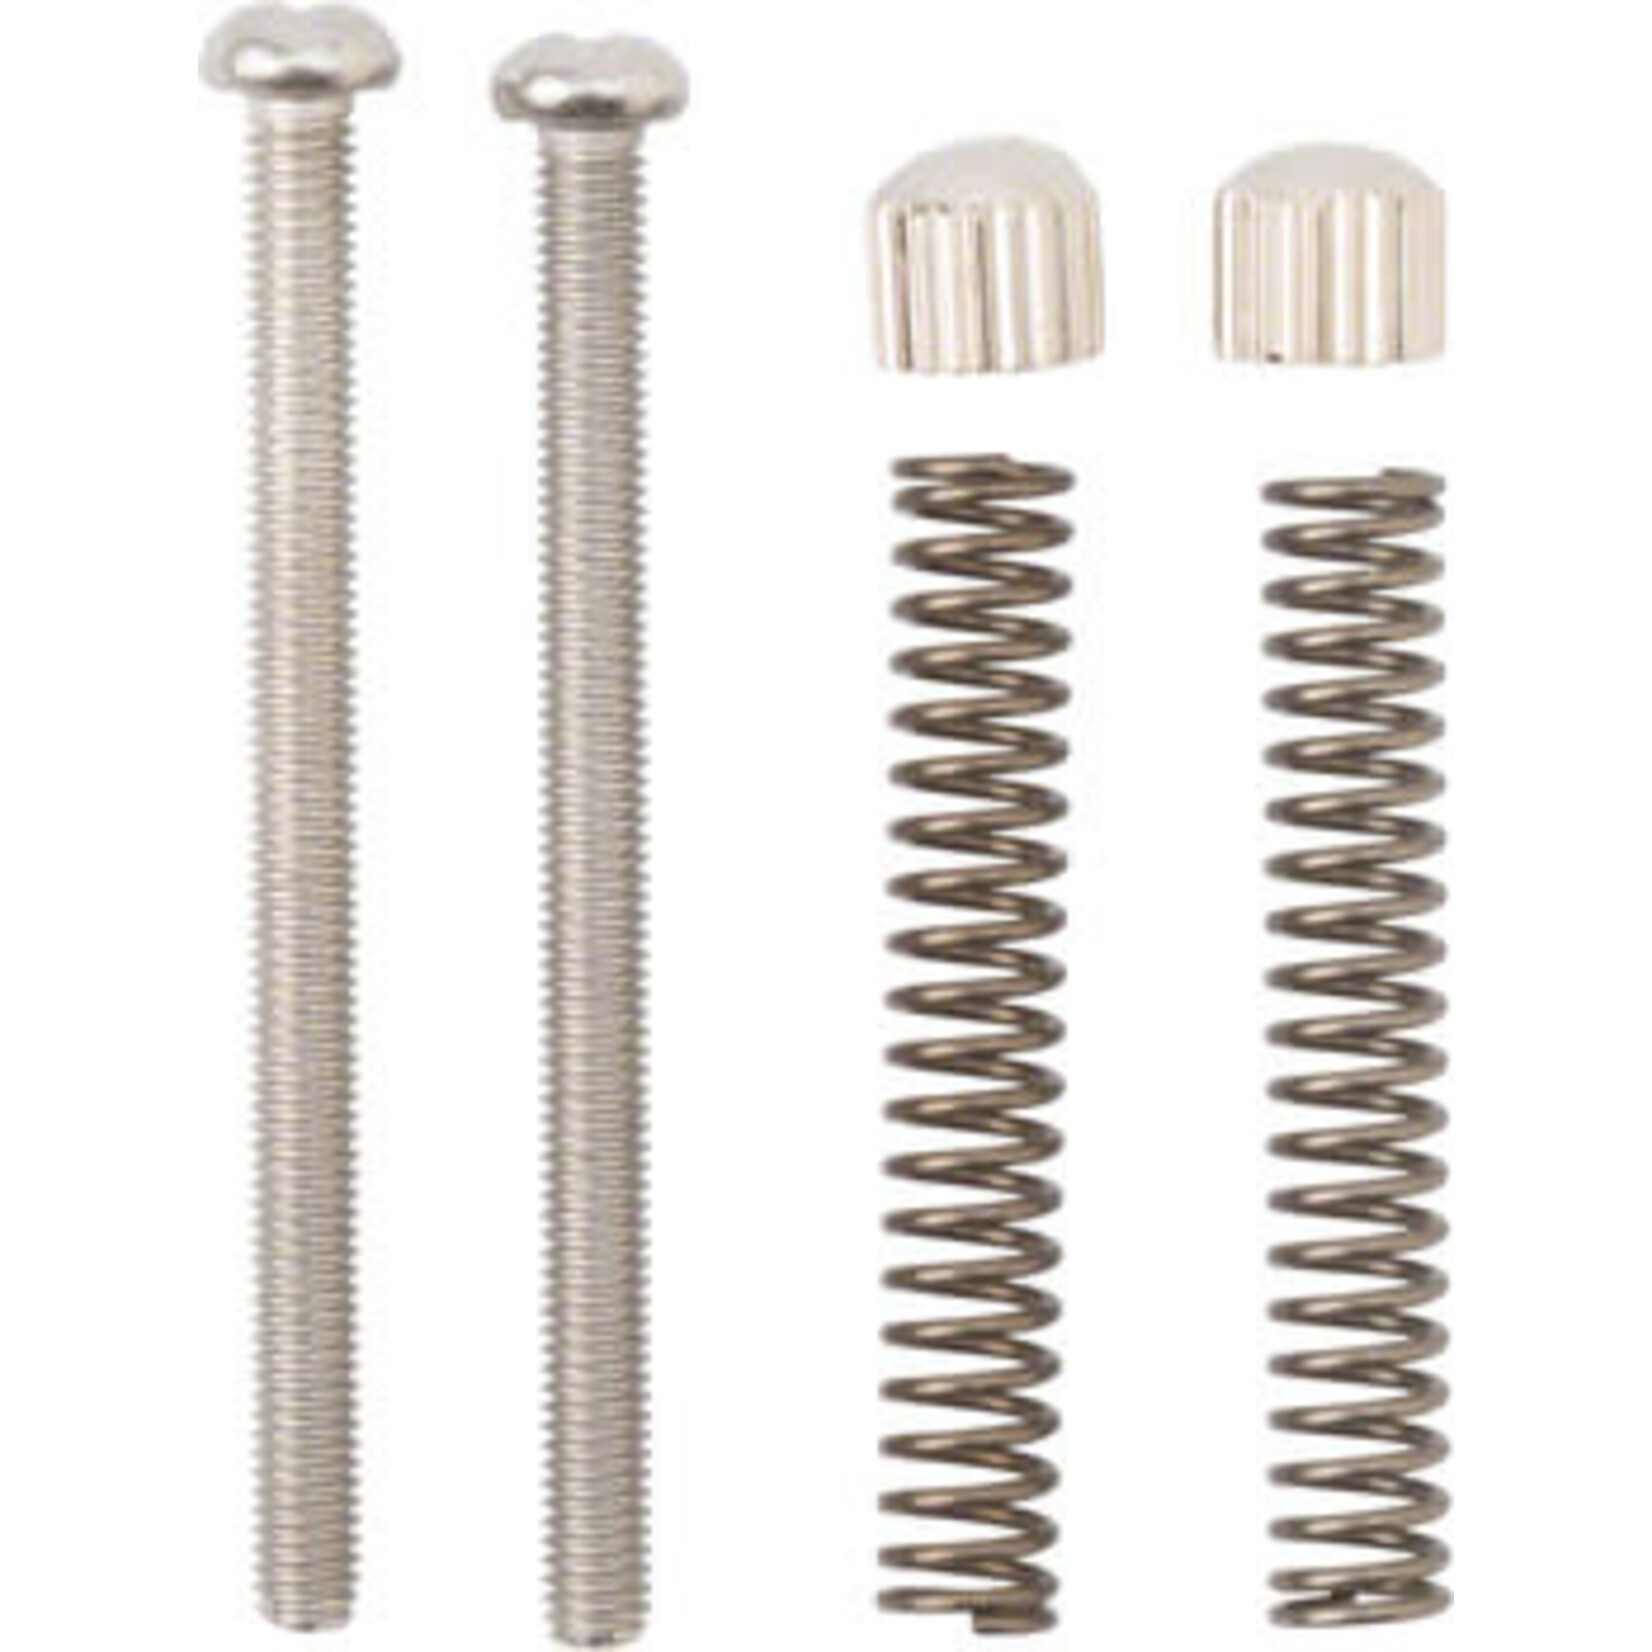 Surly Surly Cross Check Frame Replacement Dropout Screws Pair